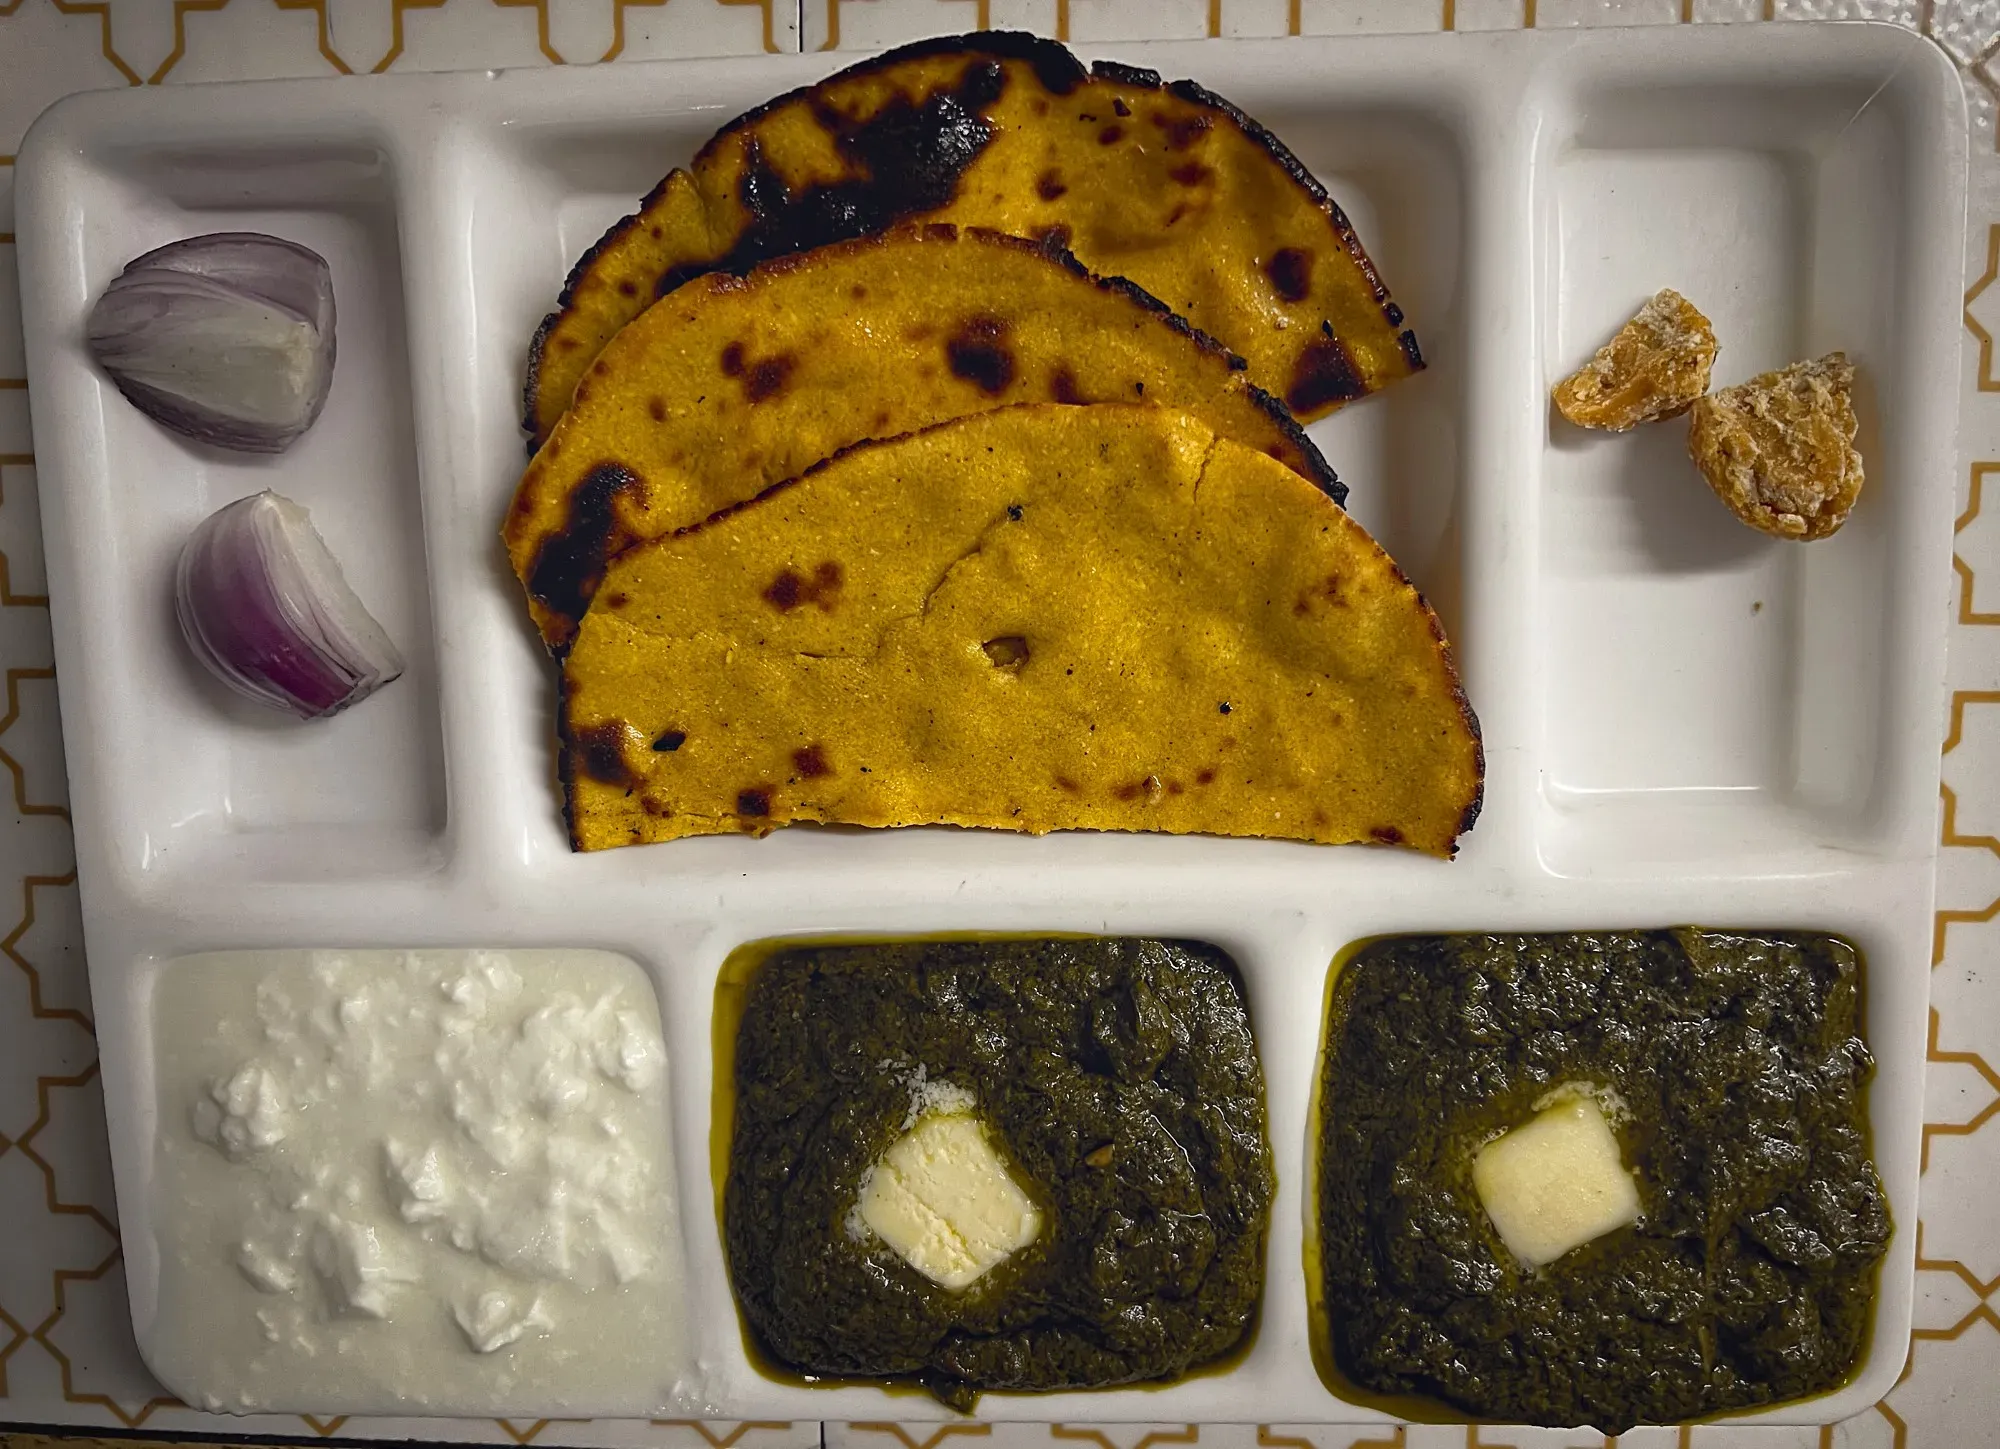 Tray with two helpings of Saag with butter on top, a helping of yogurt, and 3 pieces of Makke Ki Rotti. Overhead shot.